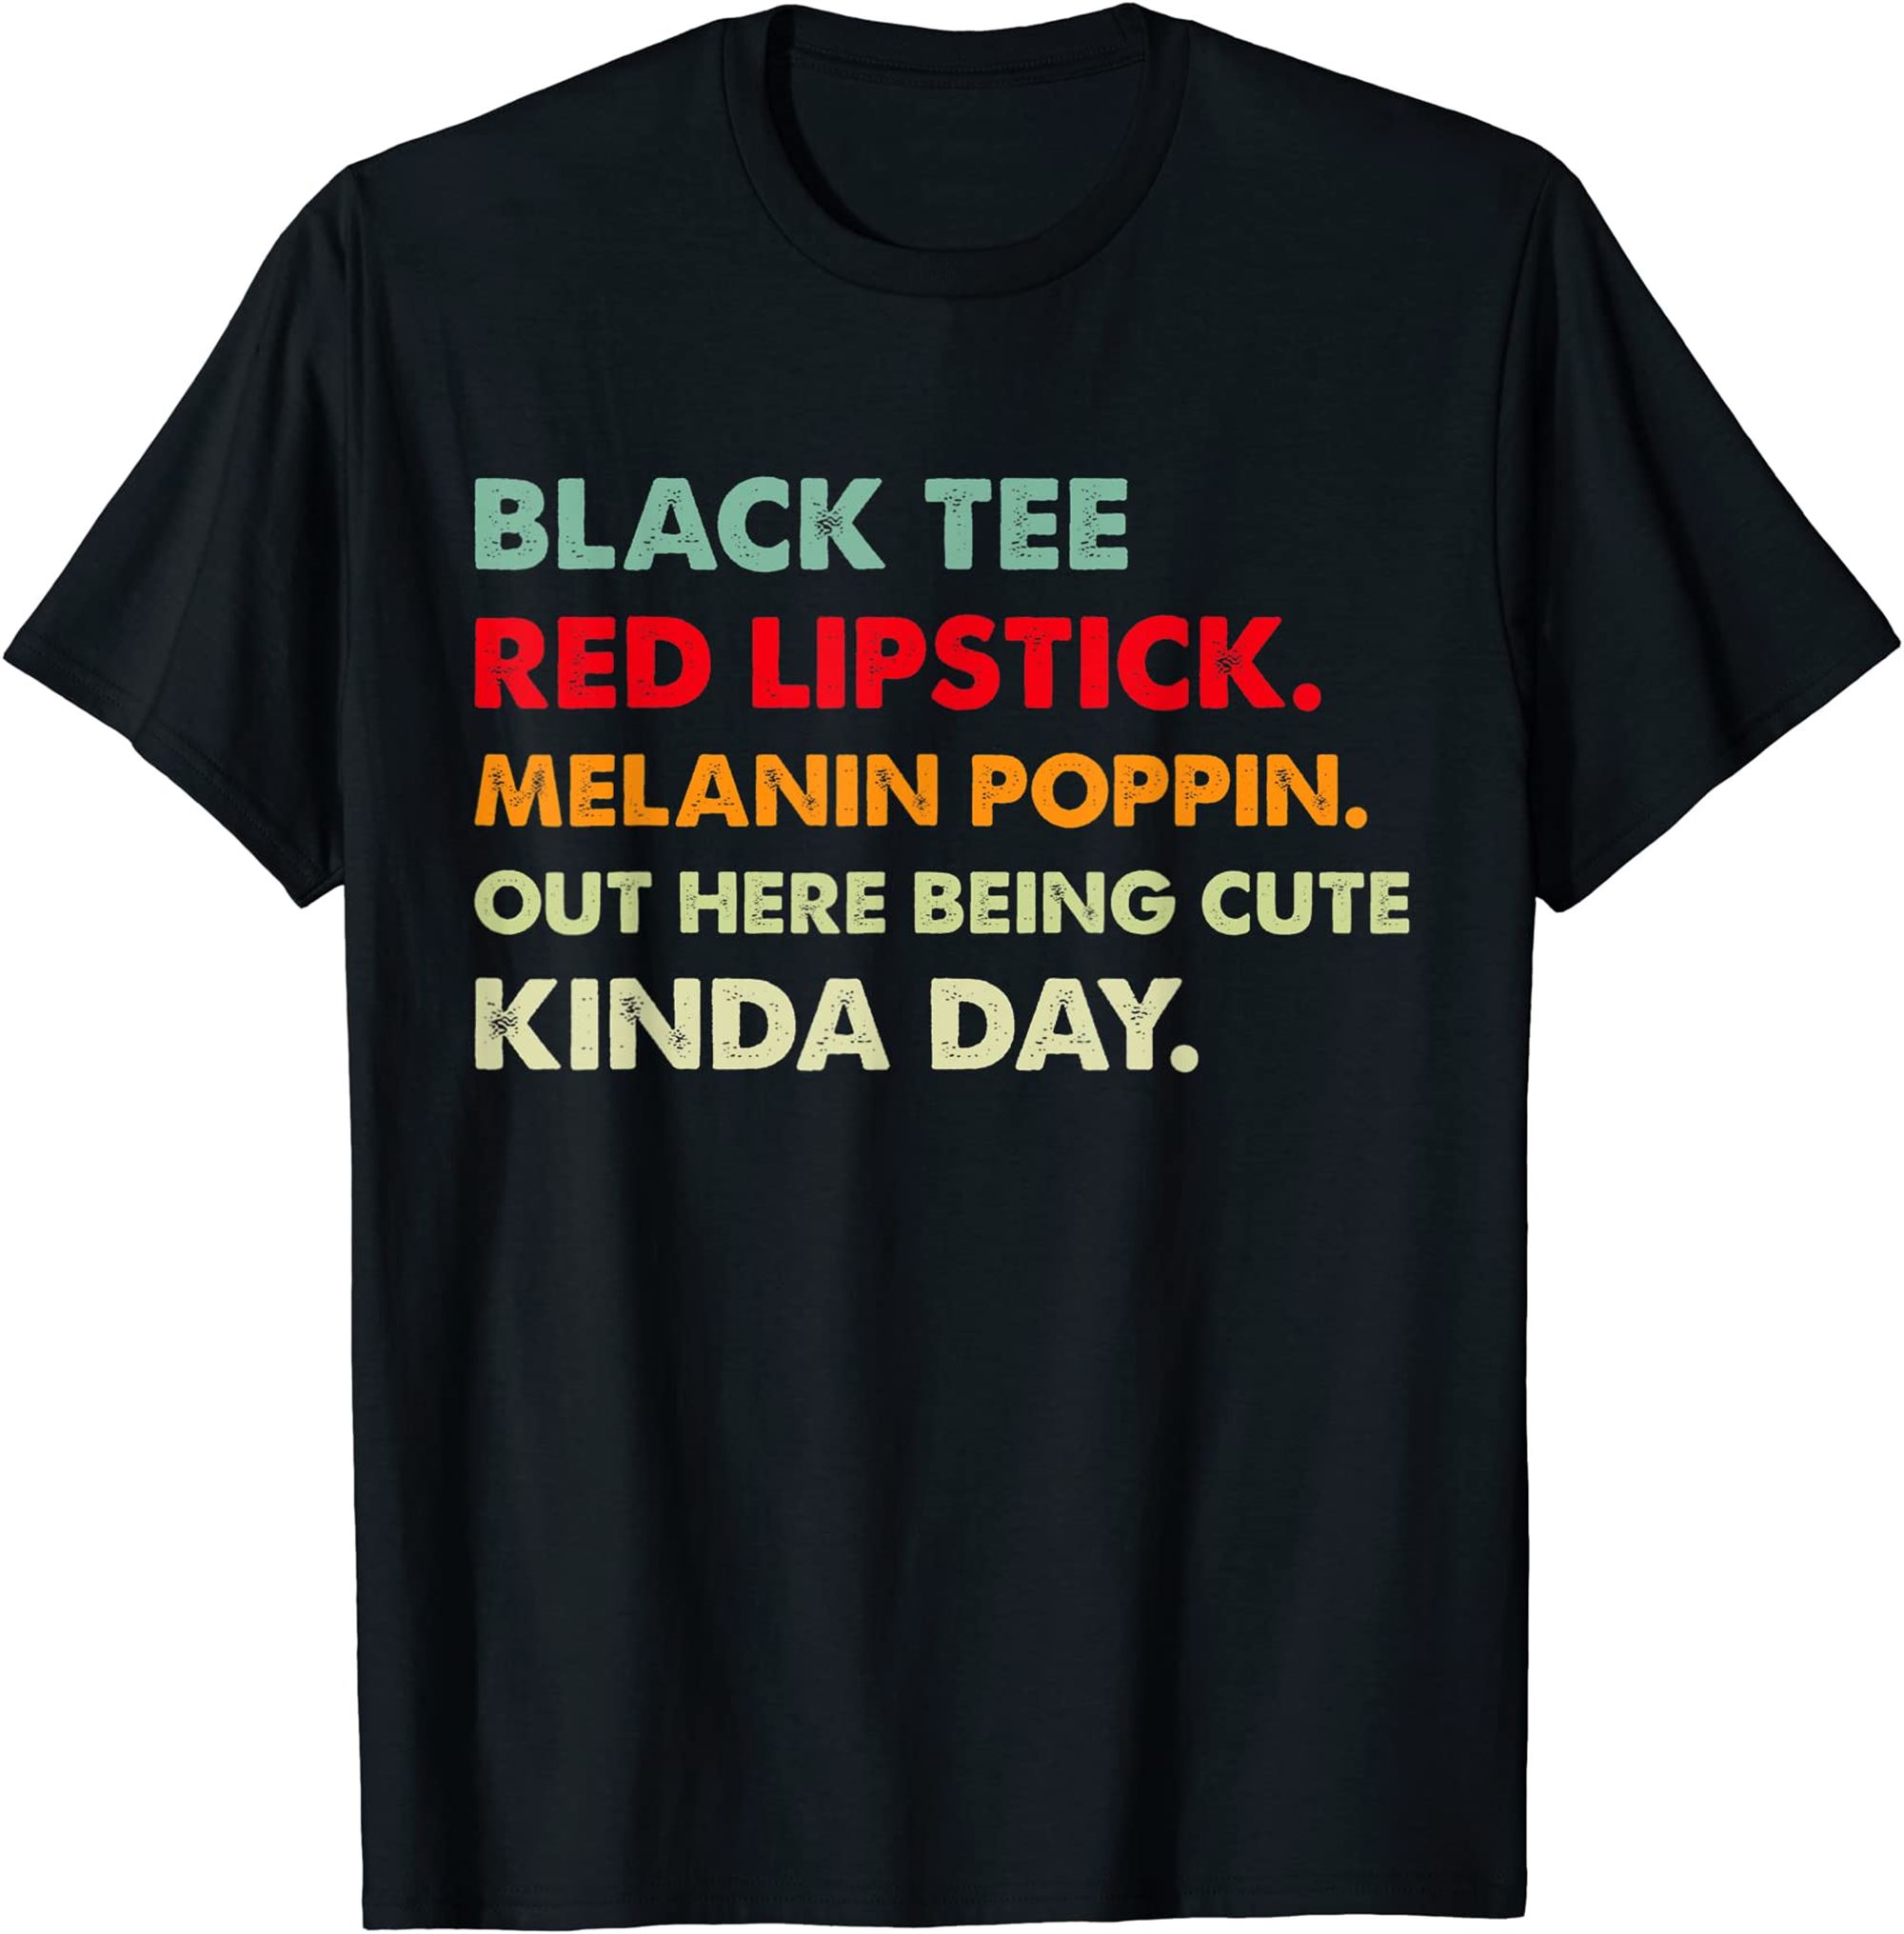 Black Tee Red Lipstick Melanin Poppin Out Here Being Cute T-shirt Plus Size Up To 5xl